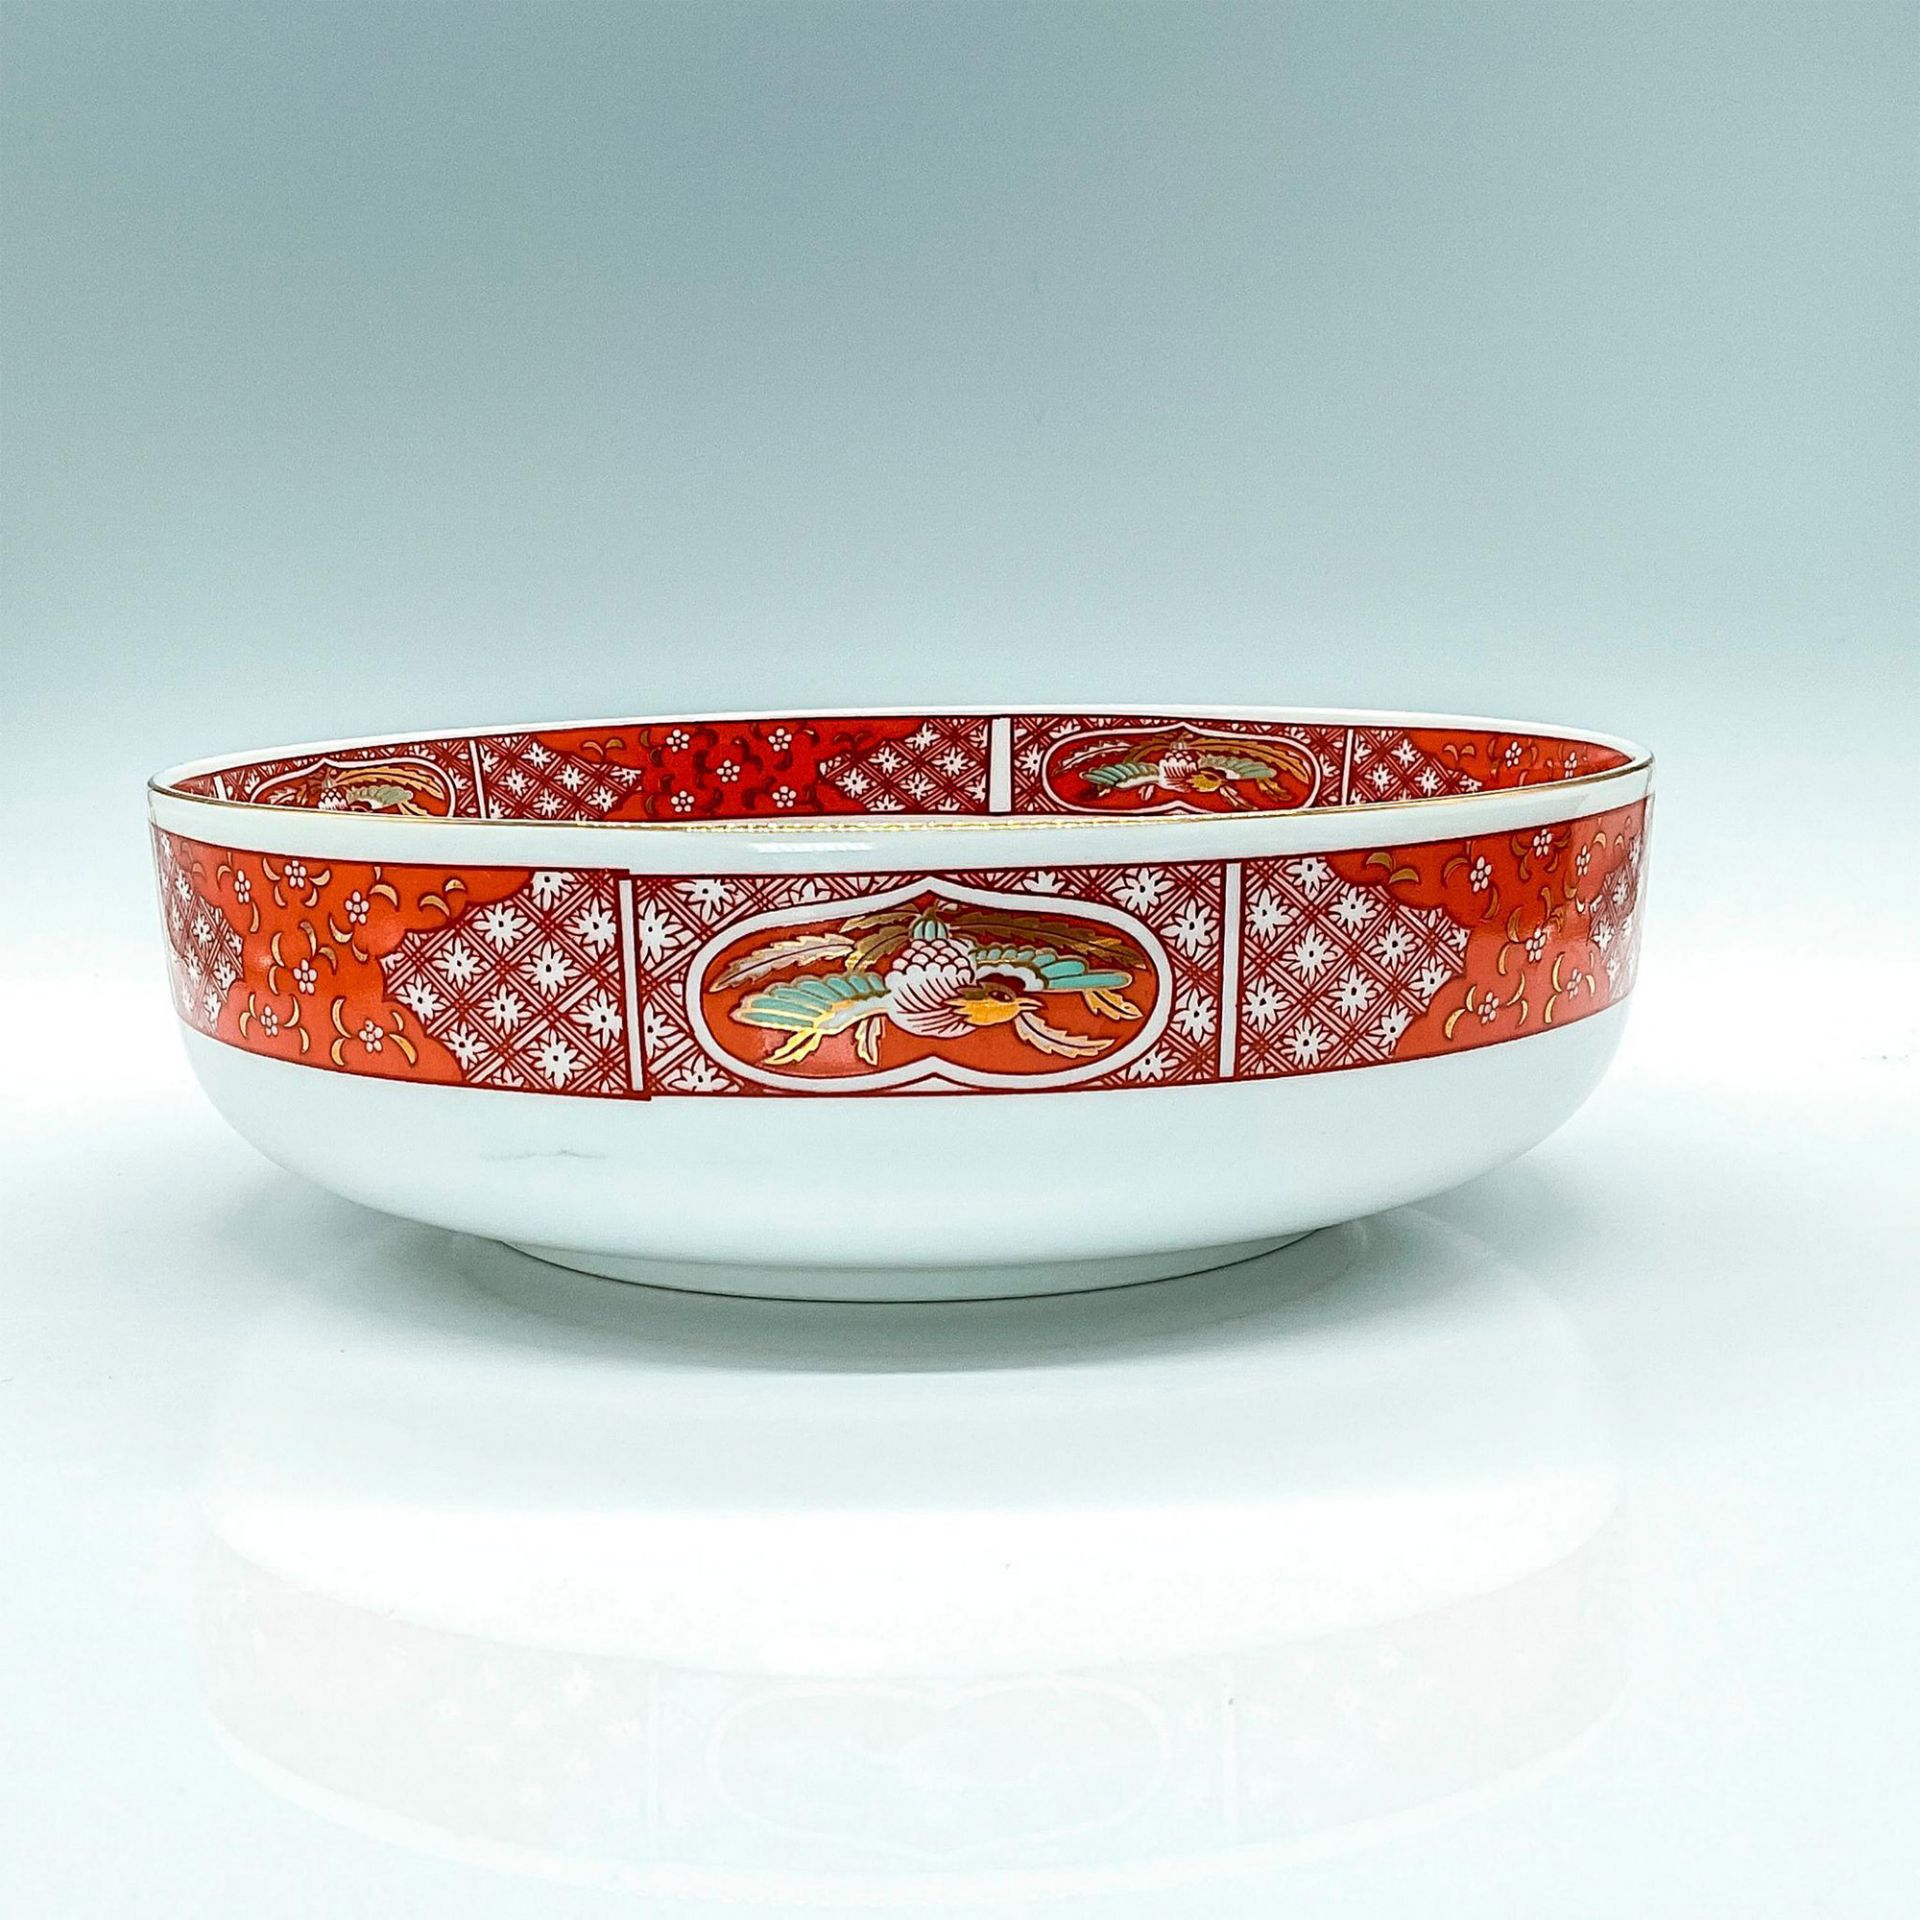 Imari Style Porcelain Rice Bowl w/Mystical Peacock Gold Accents - Image 2 of 3